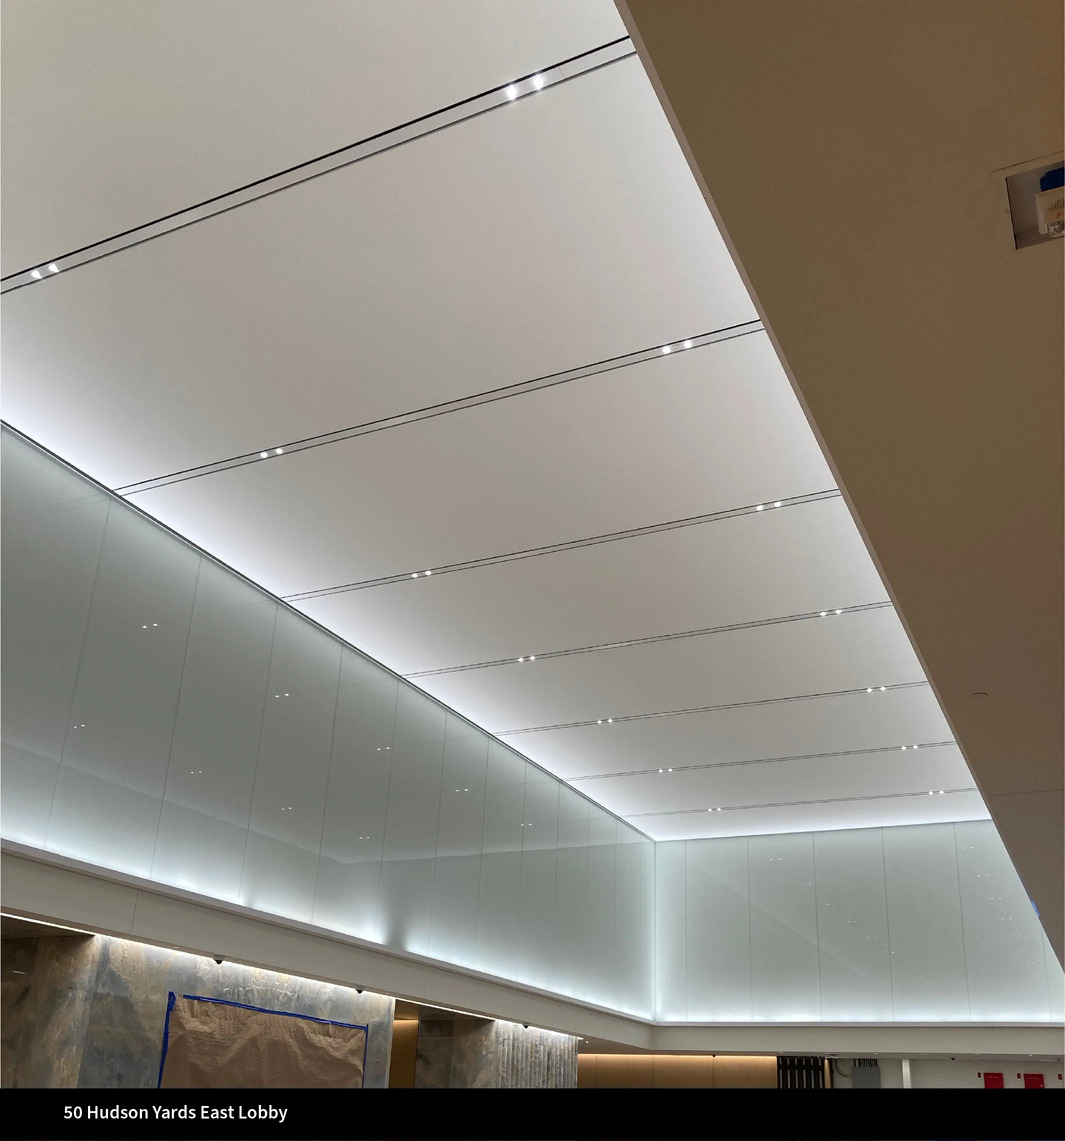 Human-Centric Lighting For Office Spaces